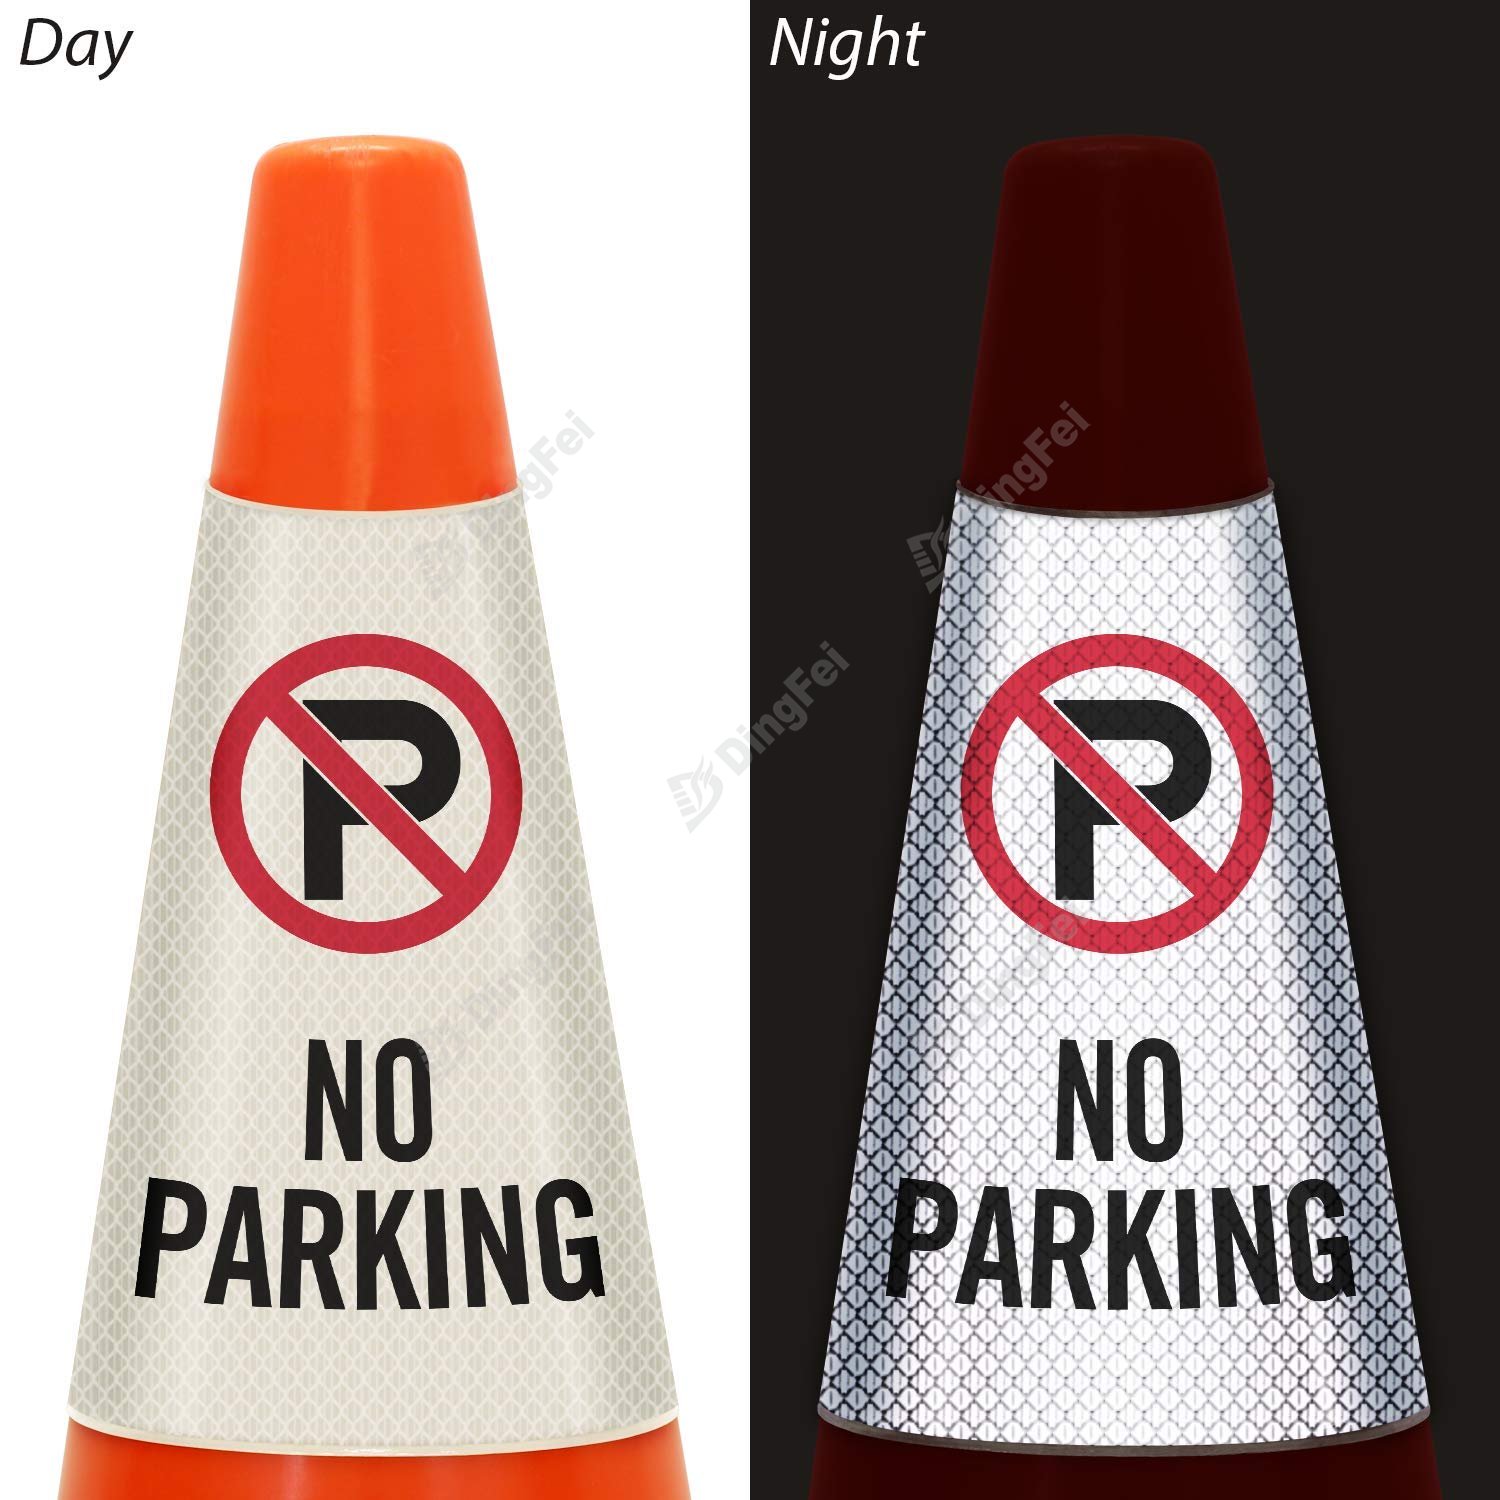 No Parking Reflective Traffic Cone Sleeve - 